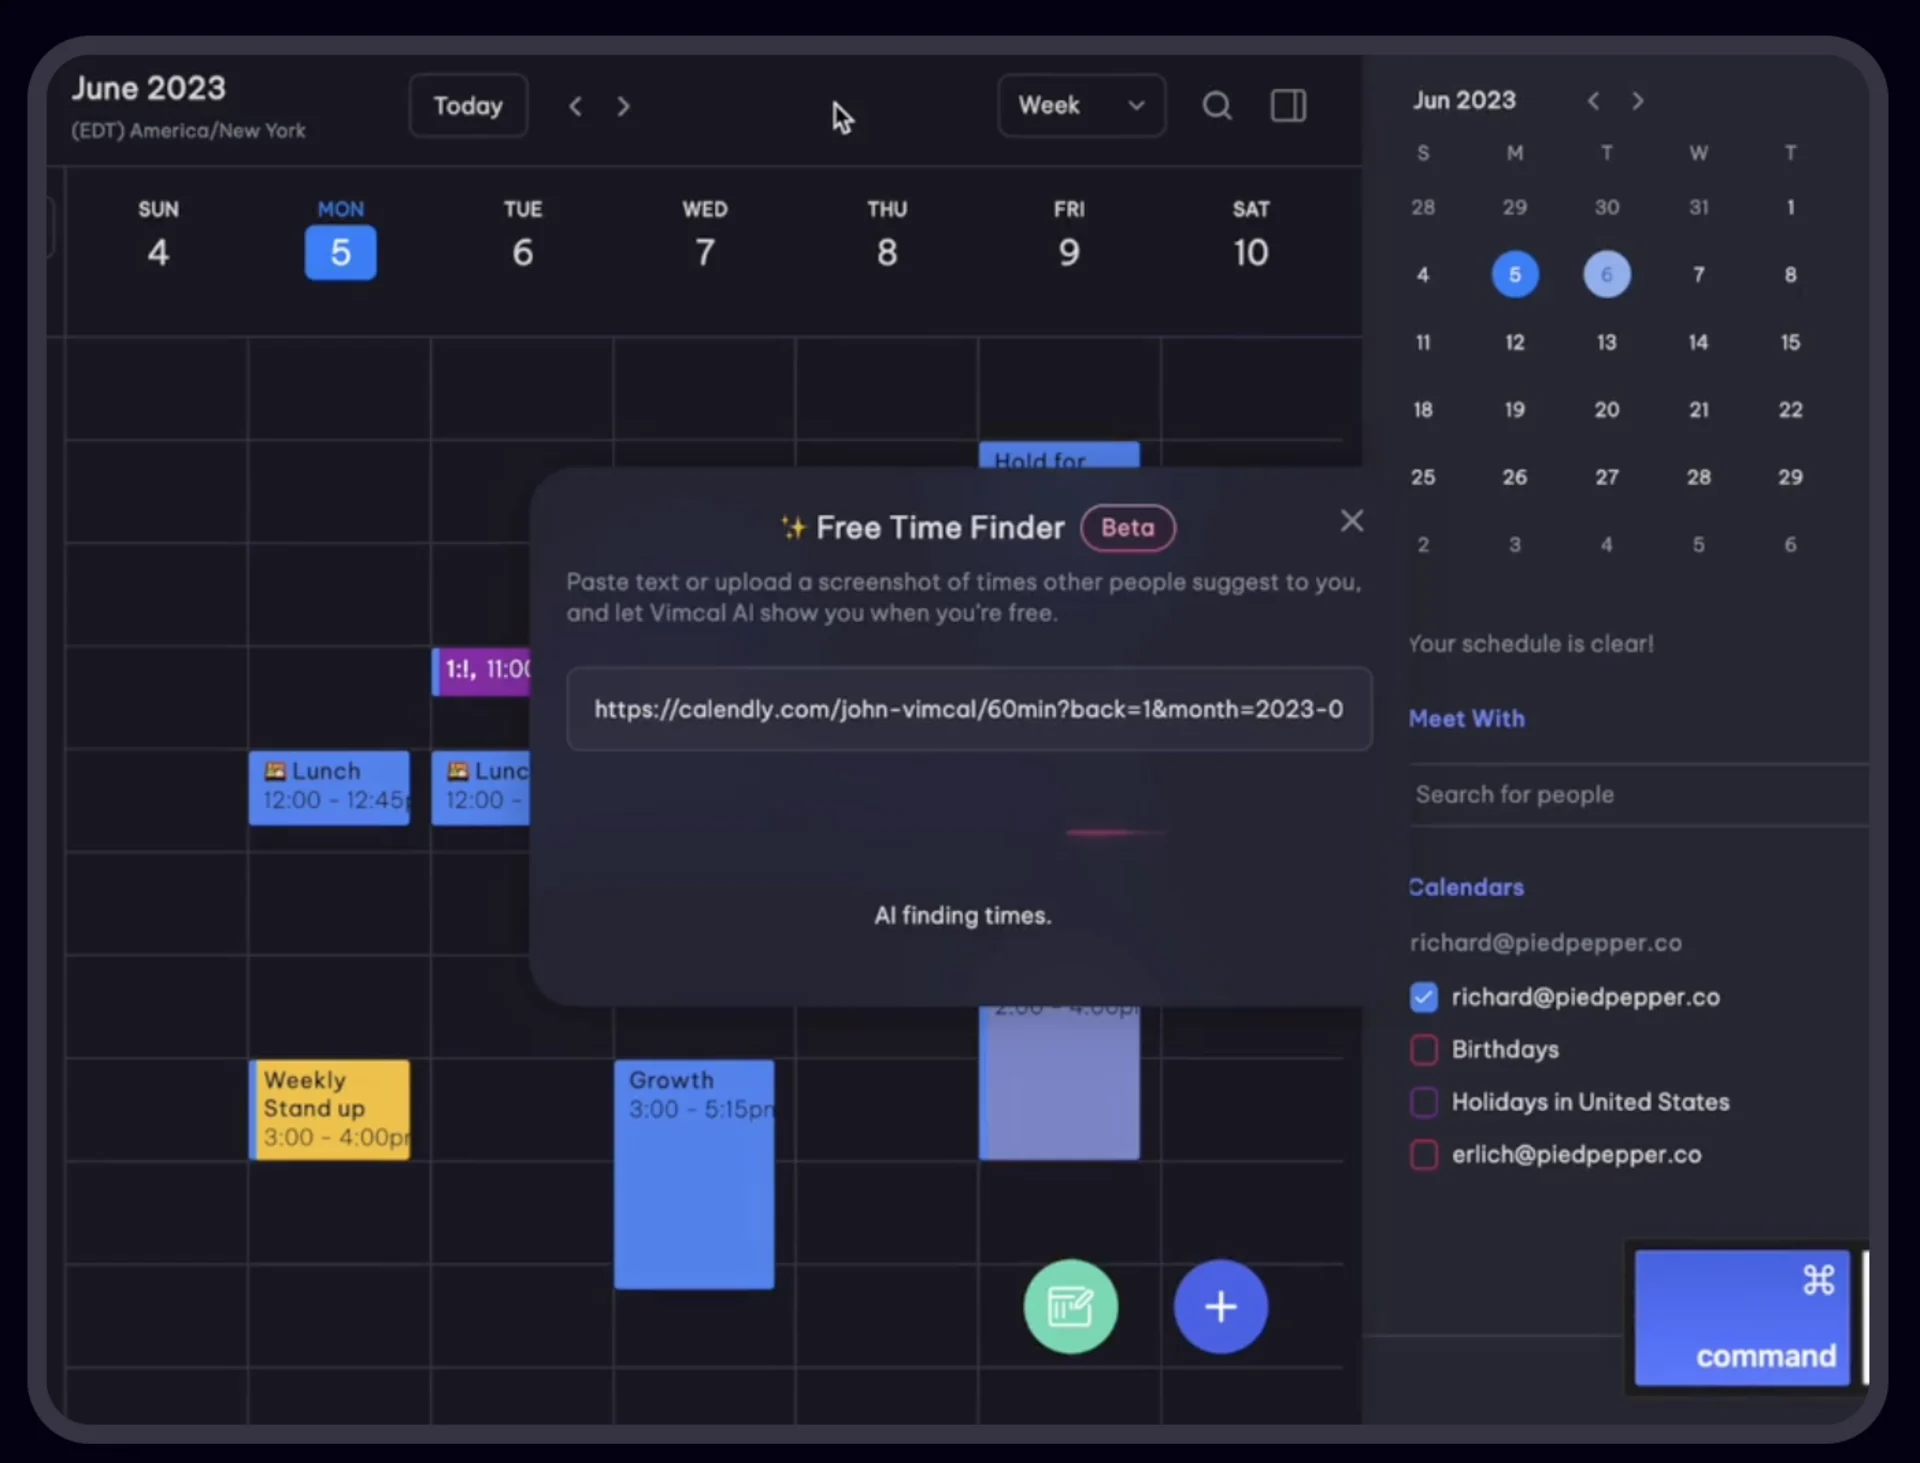 AI in productivity apps like Vimcal Free Time Finder.